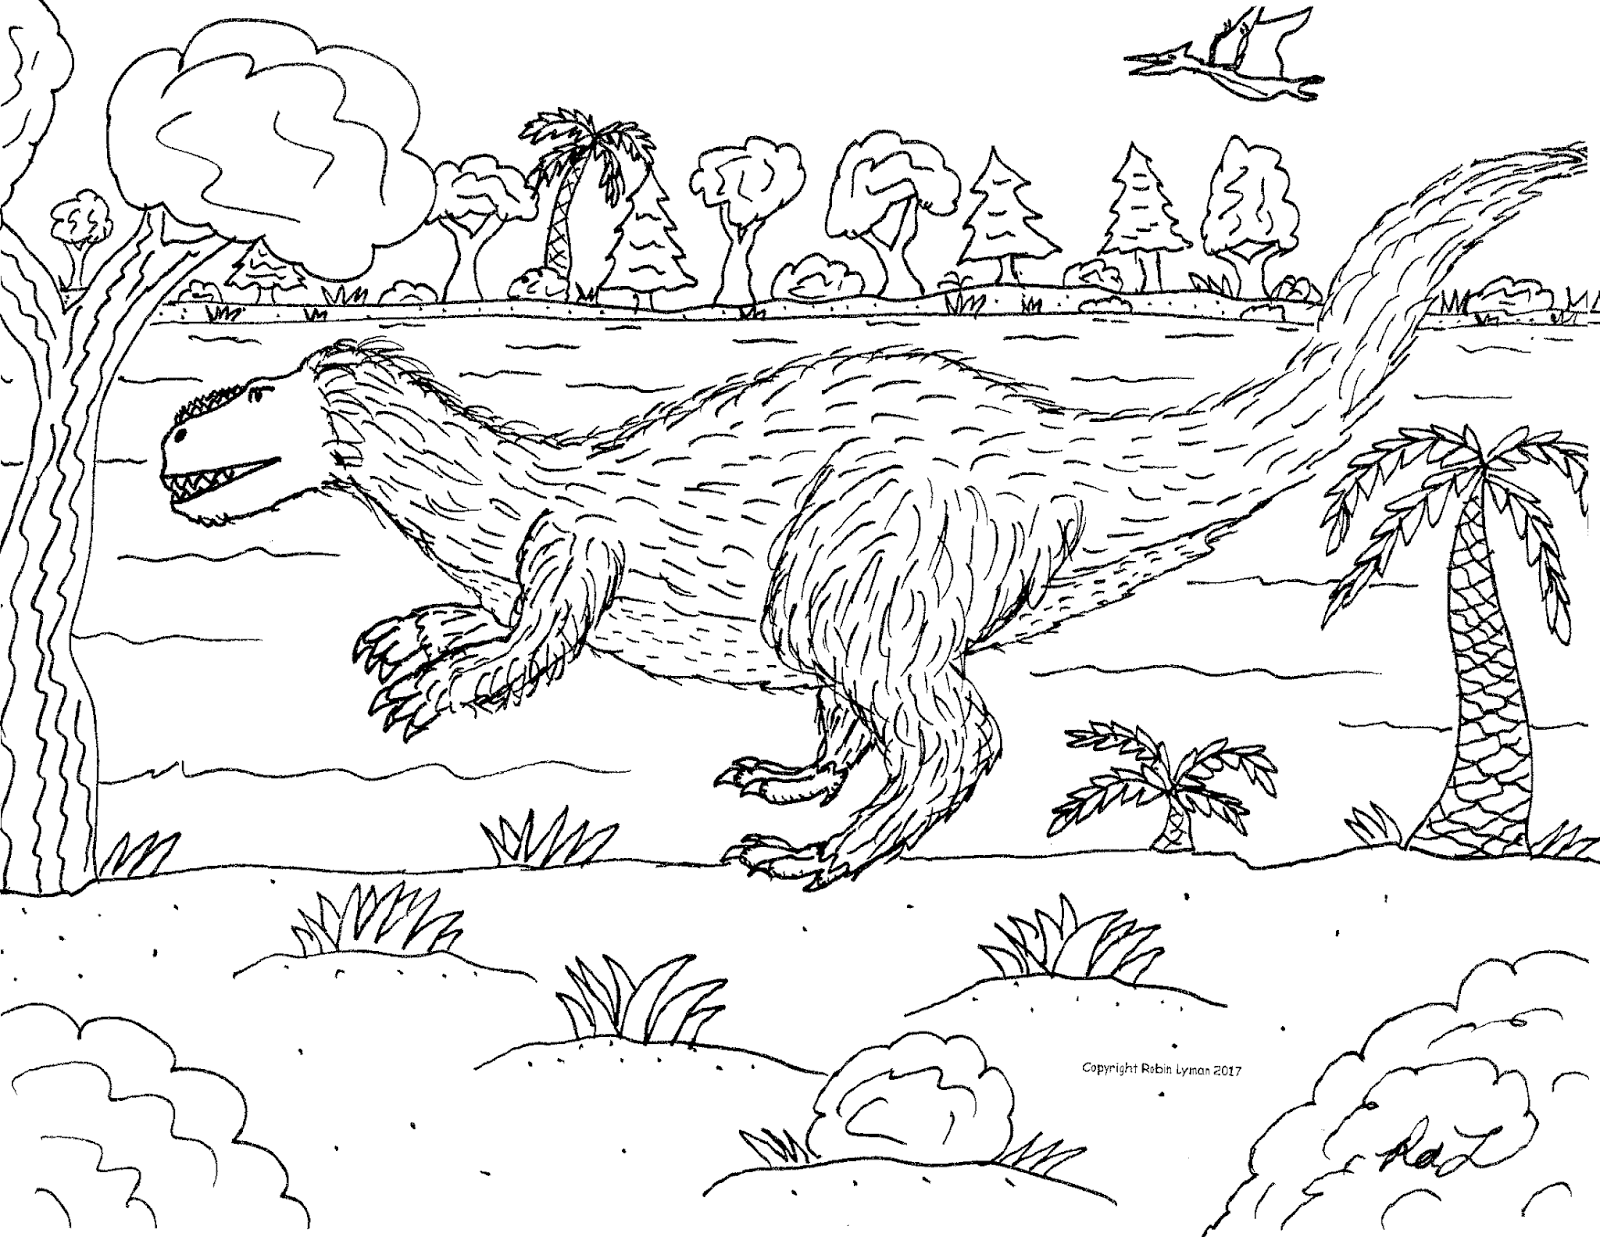 Robin's Great Coloring Pages: T. rex Chick, Yutyrannus, & Lythronax the  Feathered Tyrannosaurs